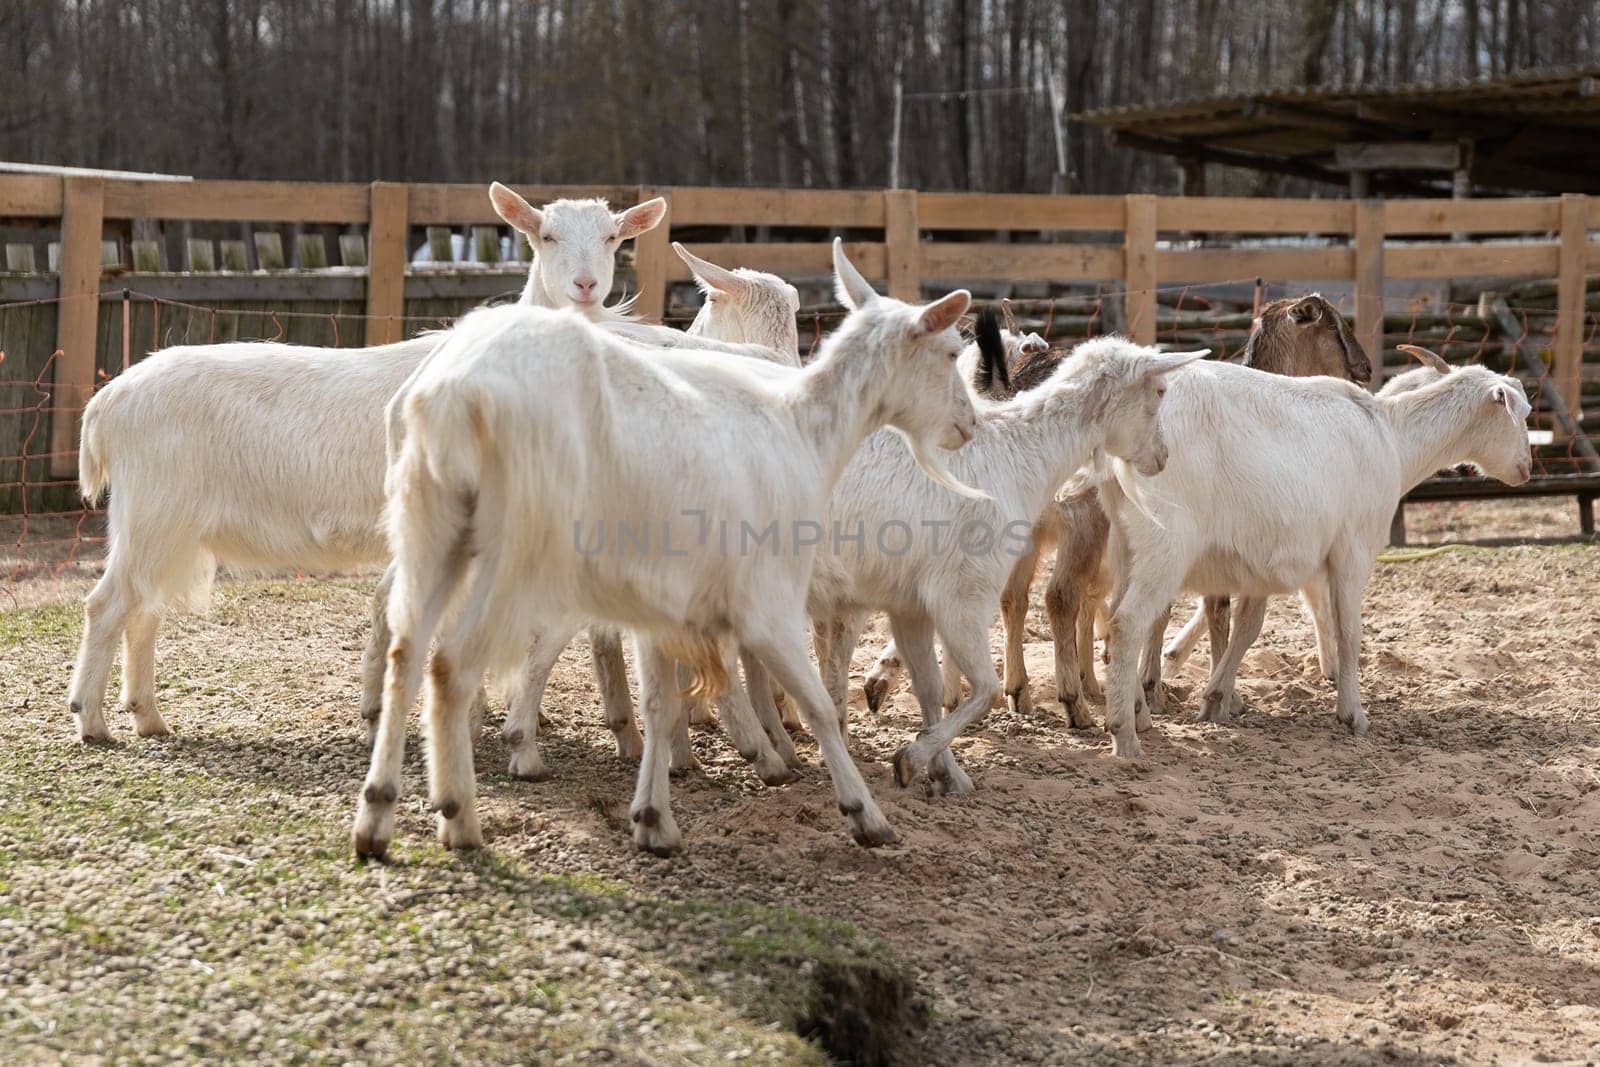 A large group of white goats are gathered closely together, standing in a row. They are all facing the same direction, with some looking towards the camera. The goats appear calm and docile as they stand side by side, showcasing their strong herd instincts.